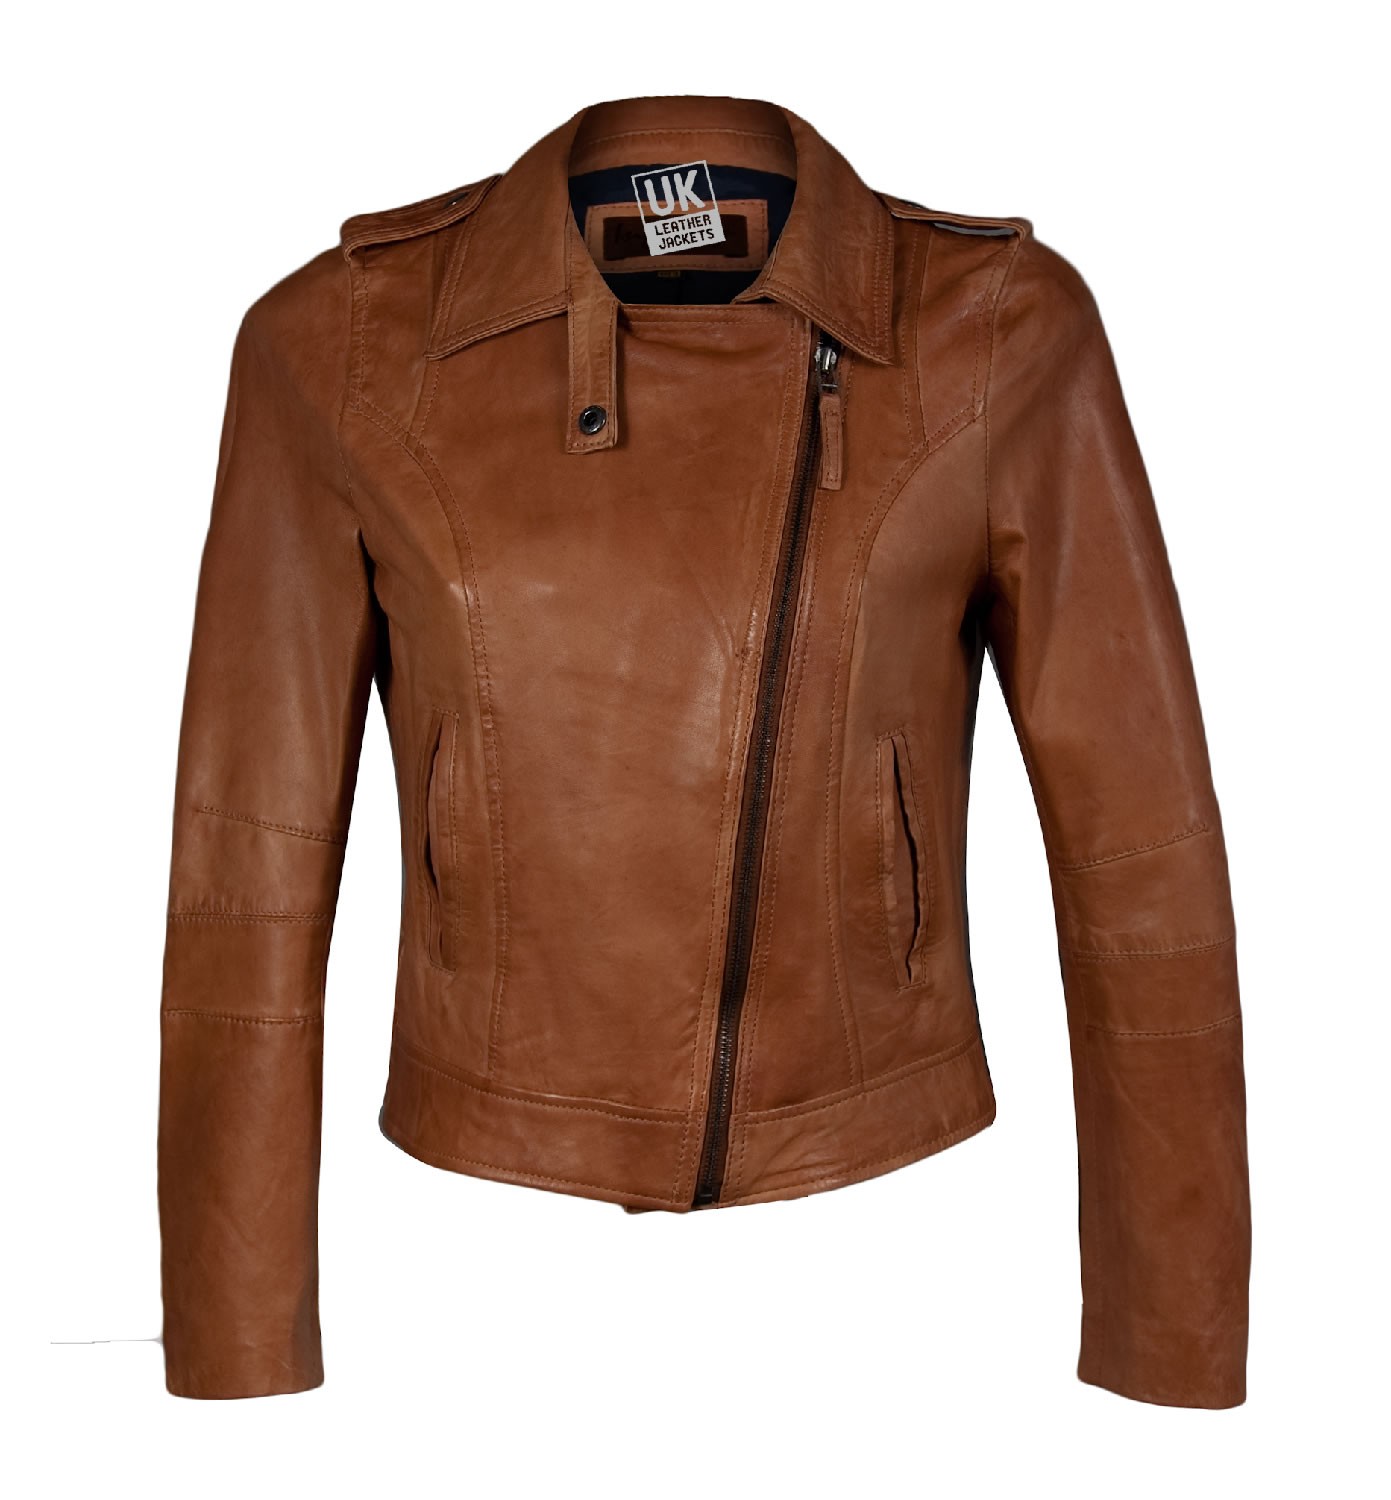 Collection Tan Leather Jacket Womens Pictures - Reikian